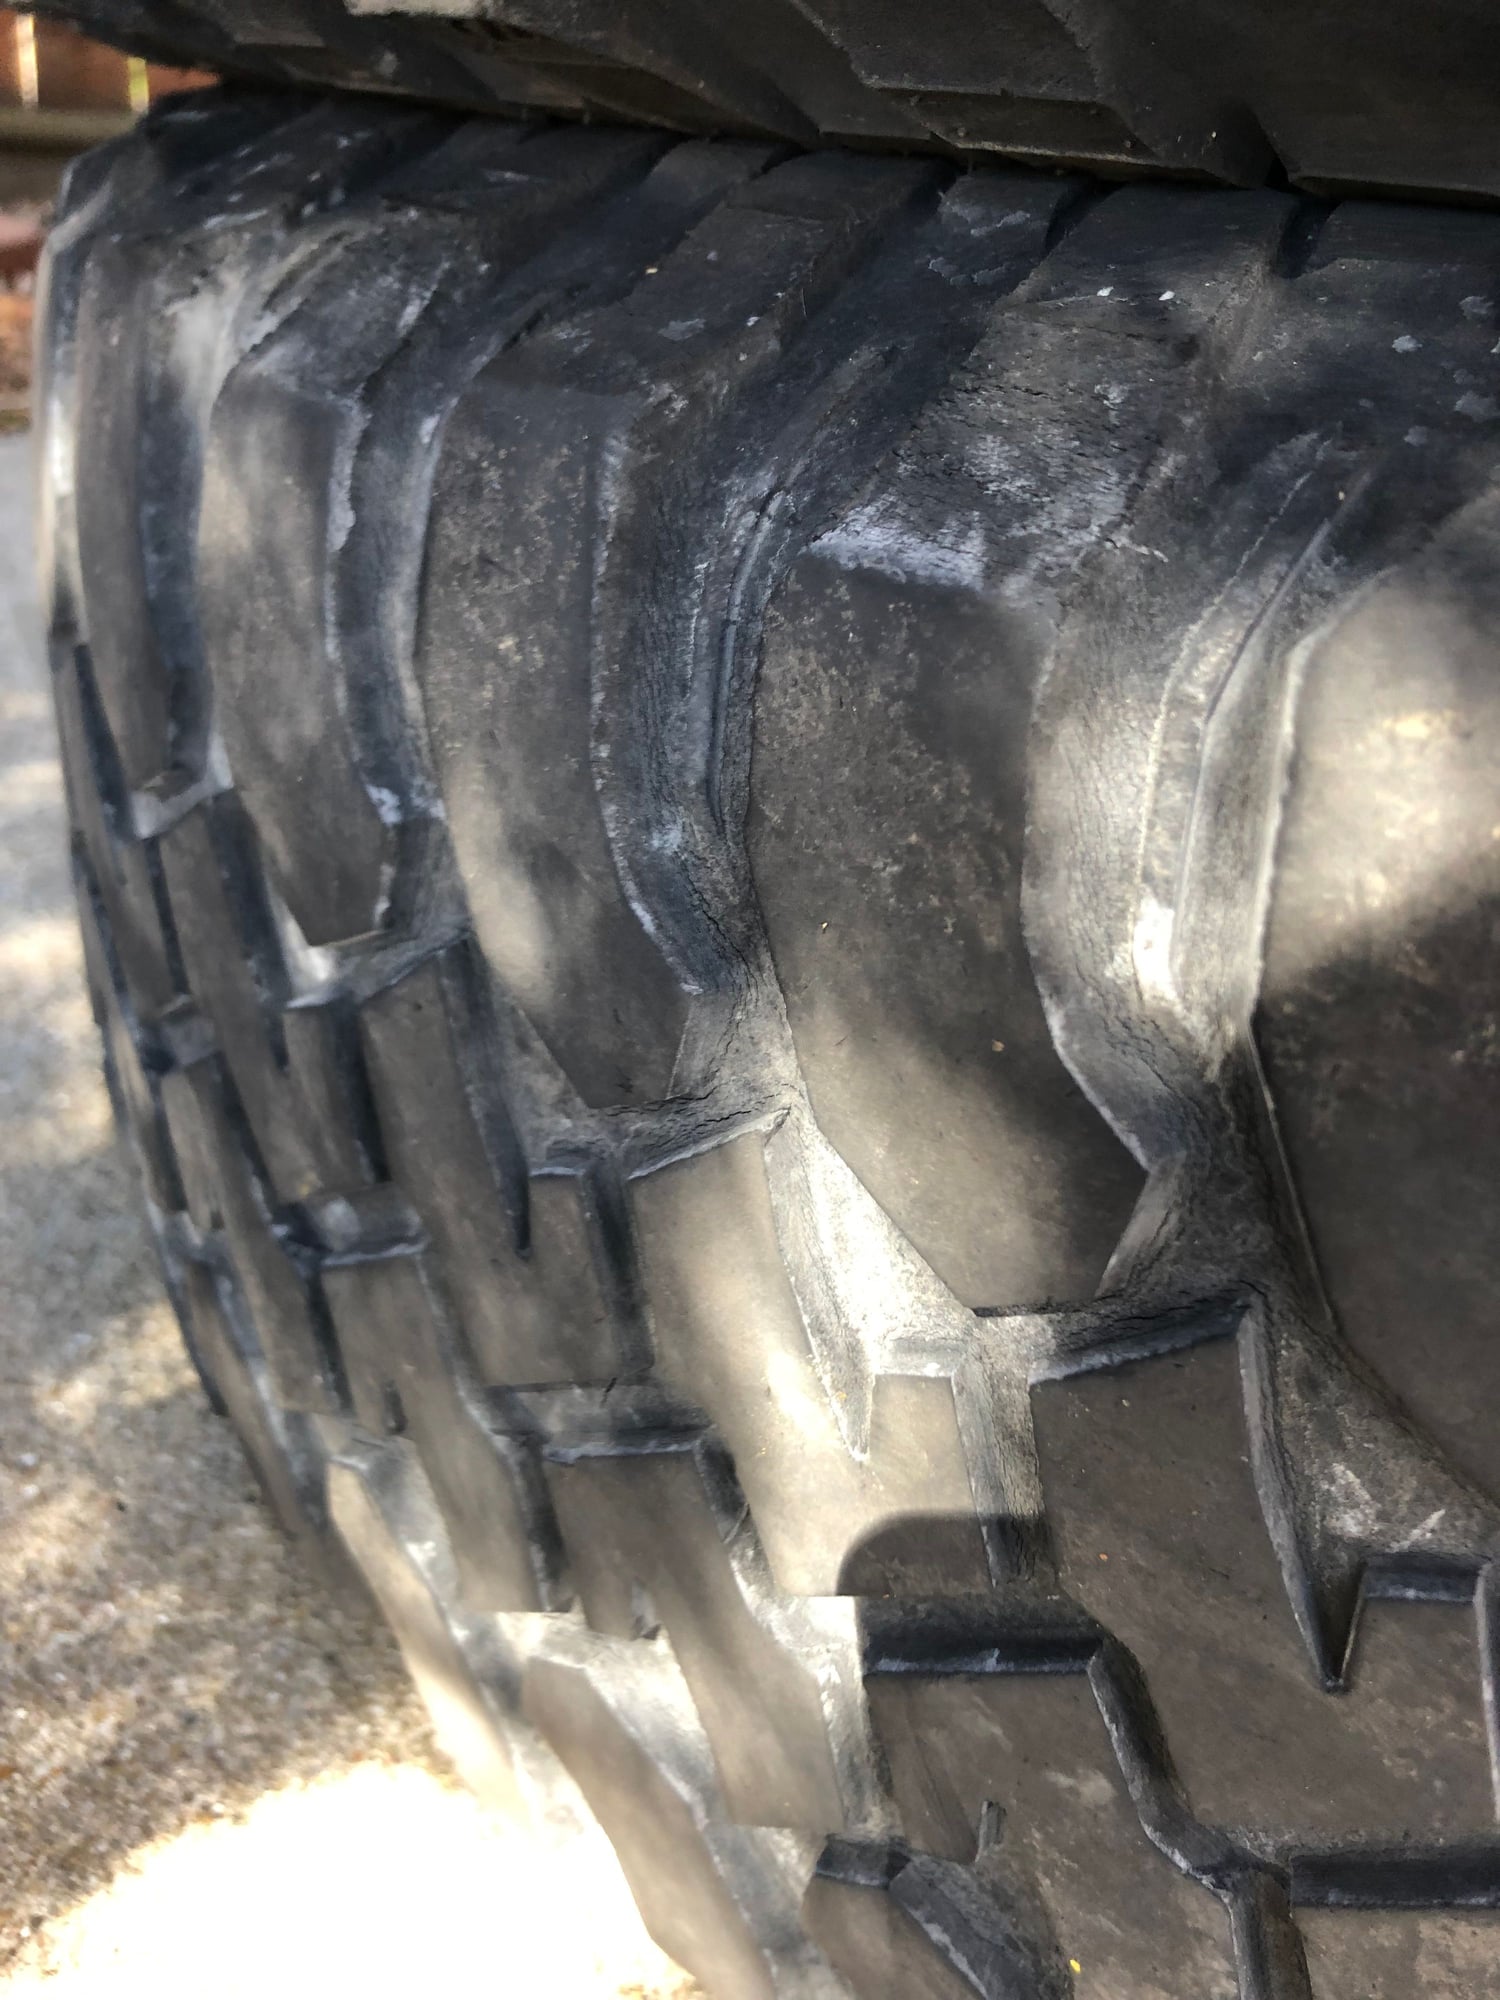 Wheels and Tires/Axles - 4 BFG MTs 255/75/17 - Used - Oak Lawn, IL 60453, United States